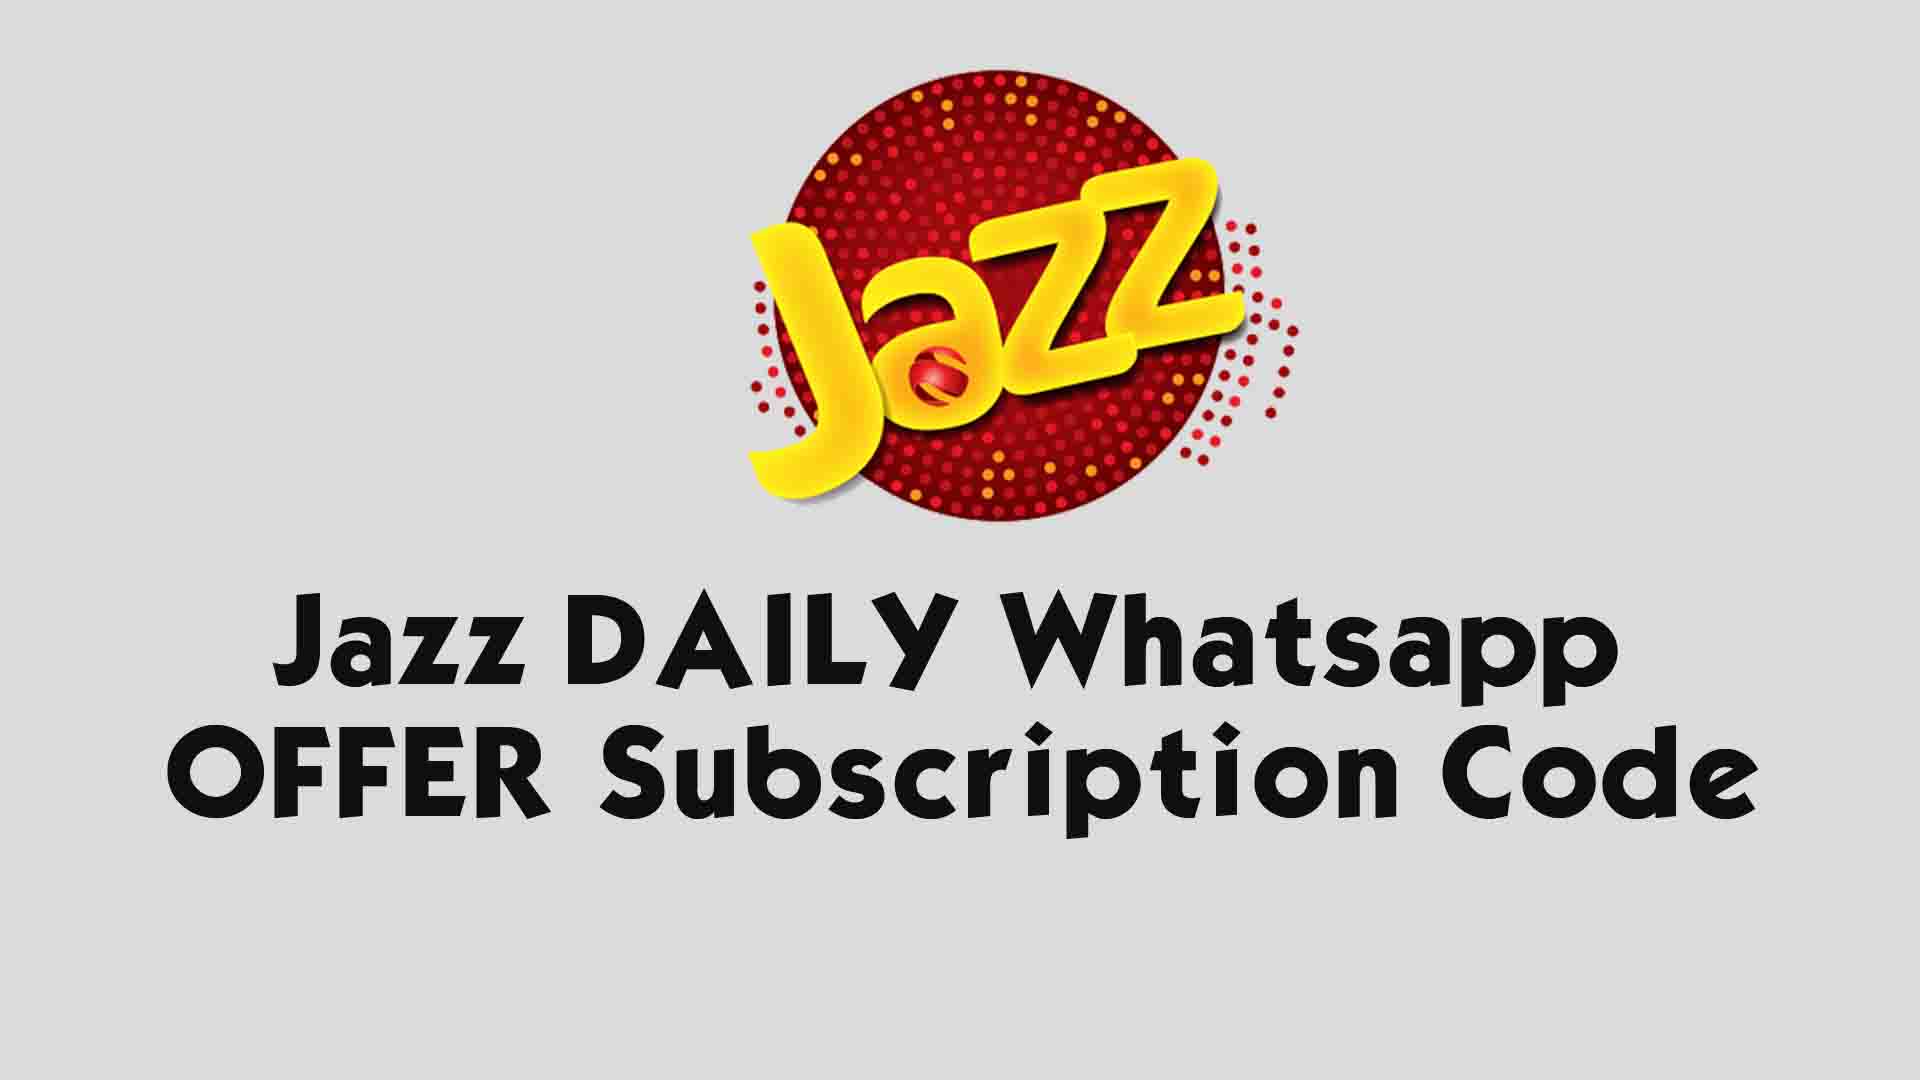 Jazz DAILY Whatsapp OFFER Subscription Code